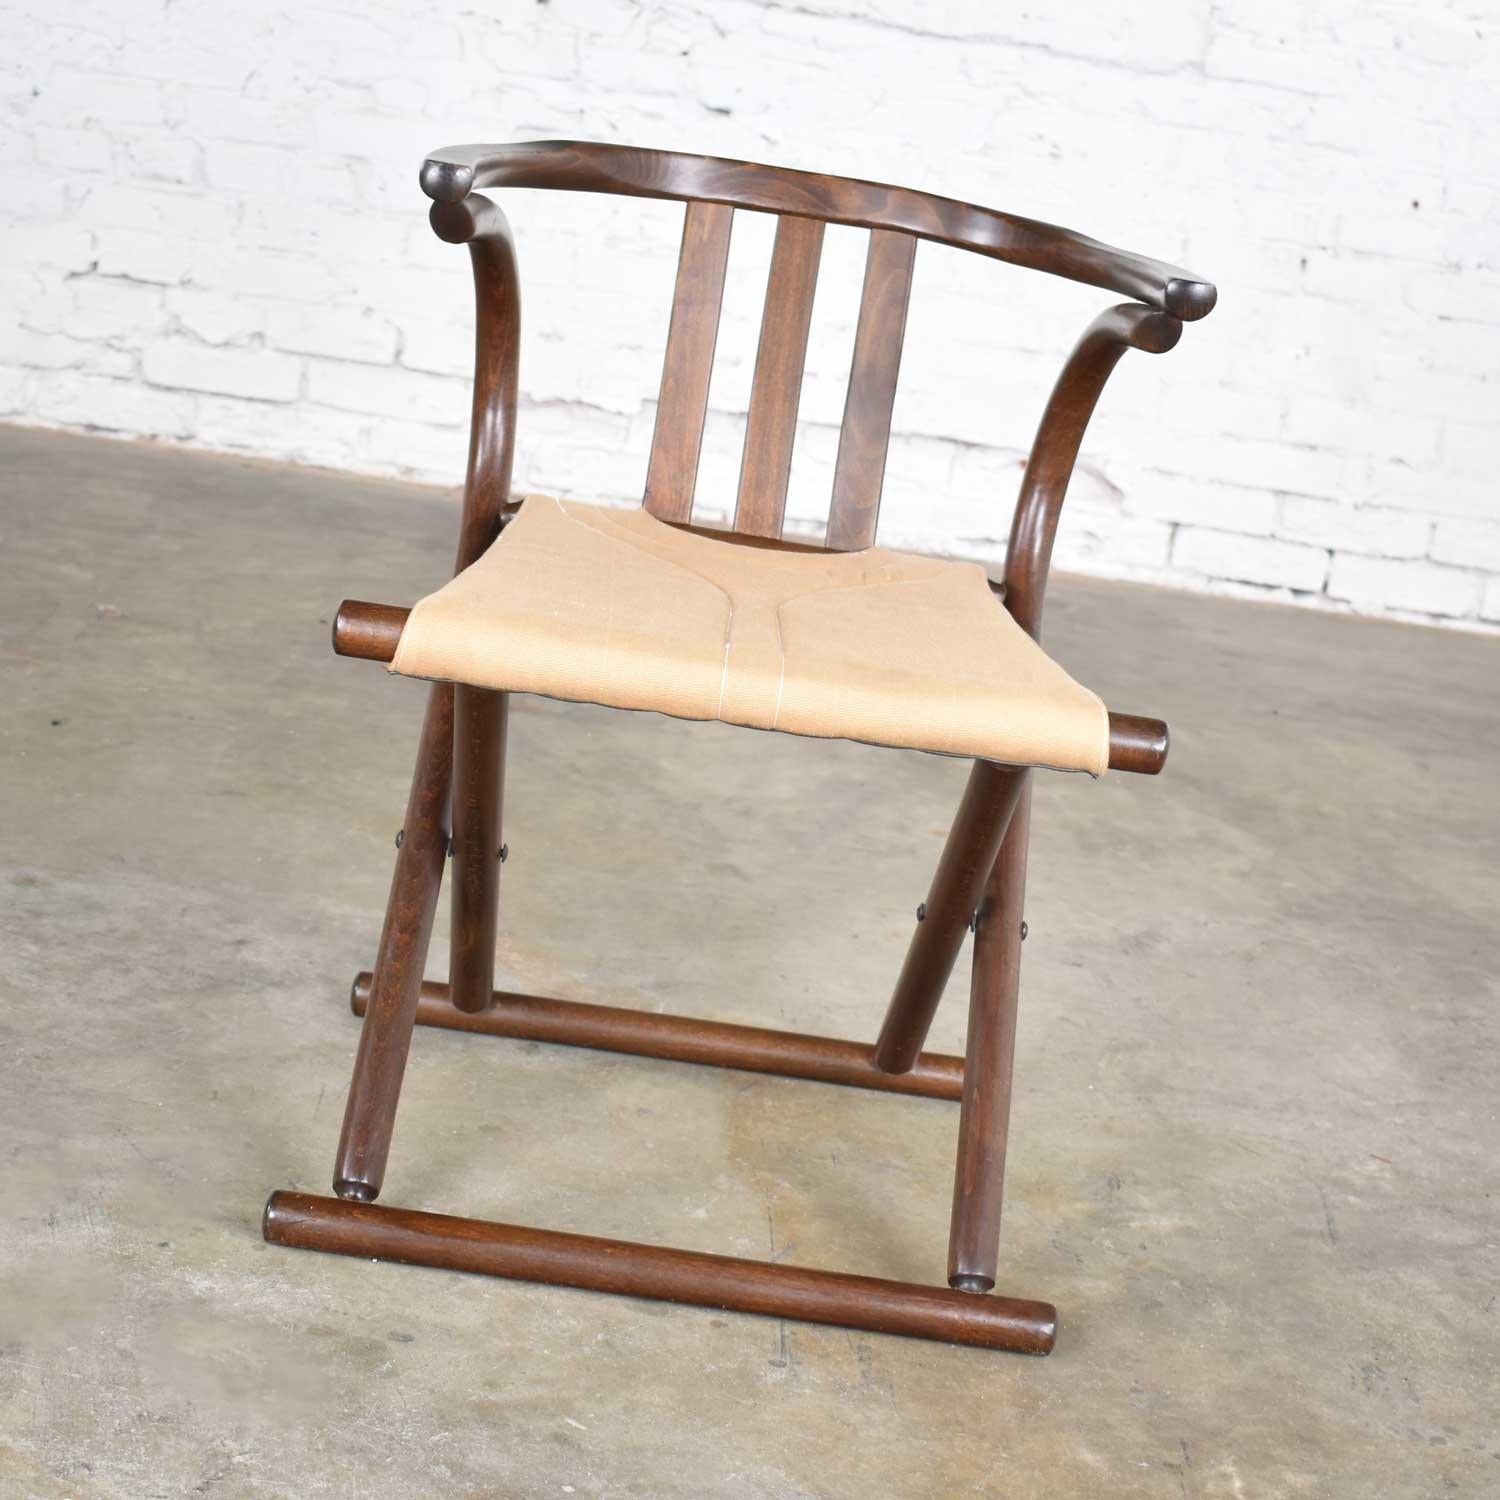 Handsome Bauhaus Campaign style walnut tone beach bentwood folding chair with a canvas sling seat made in Romania in the style of Thonet. It is in wonderful vintage condition. We did nothing but clean it and did not find any outstanding flaws only